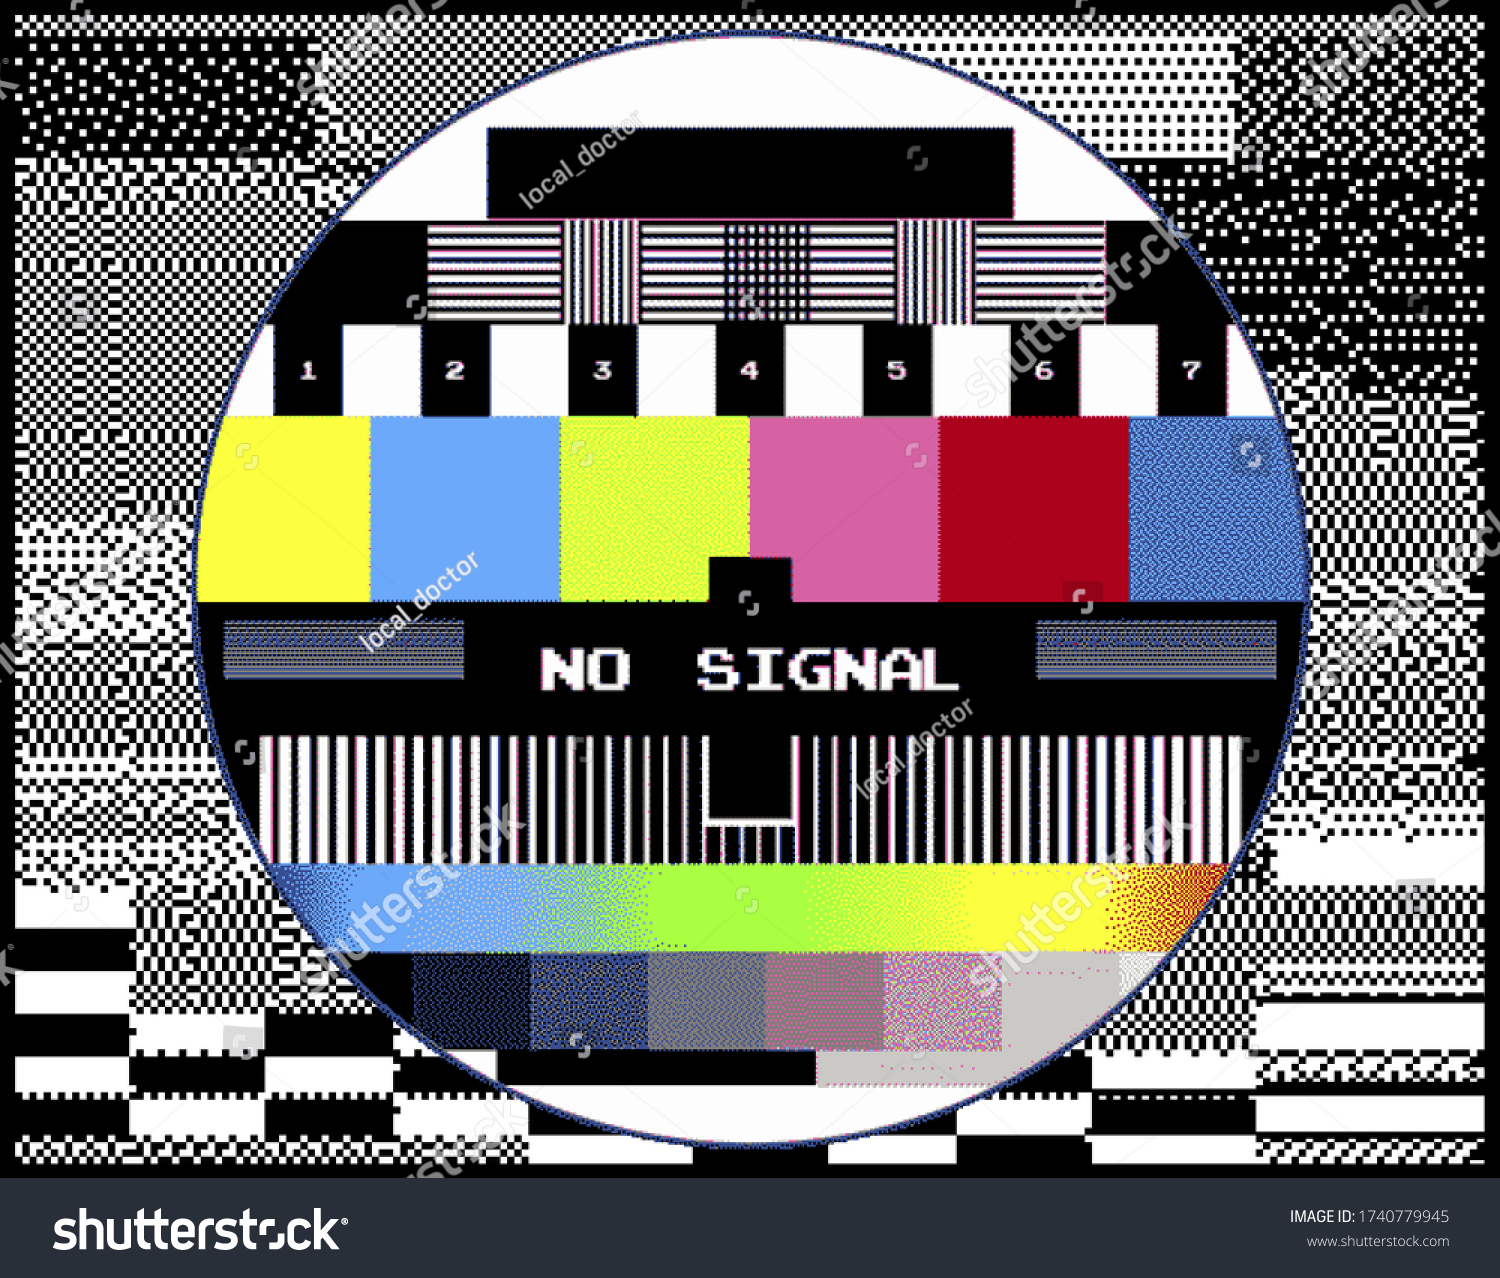 No Signal Tv Screen Pixelated Glitched Stock Vector (Royalty Free ...